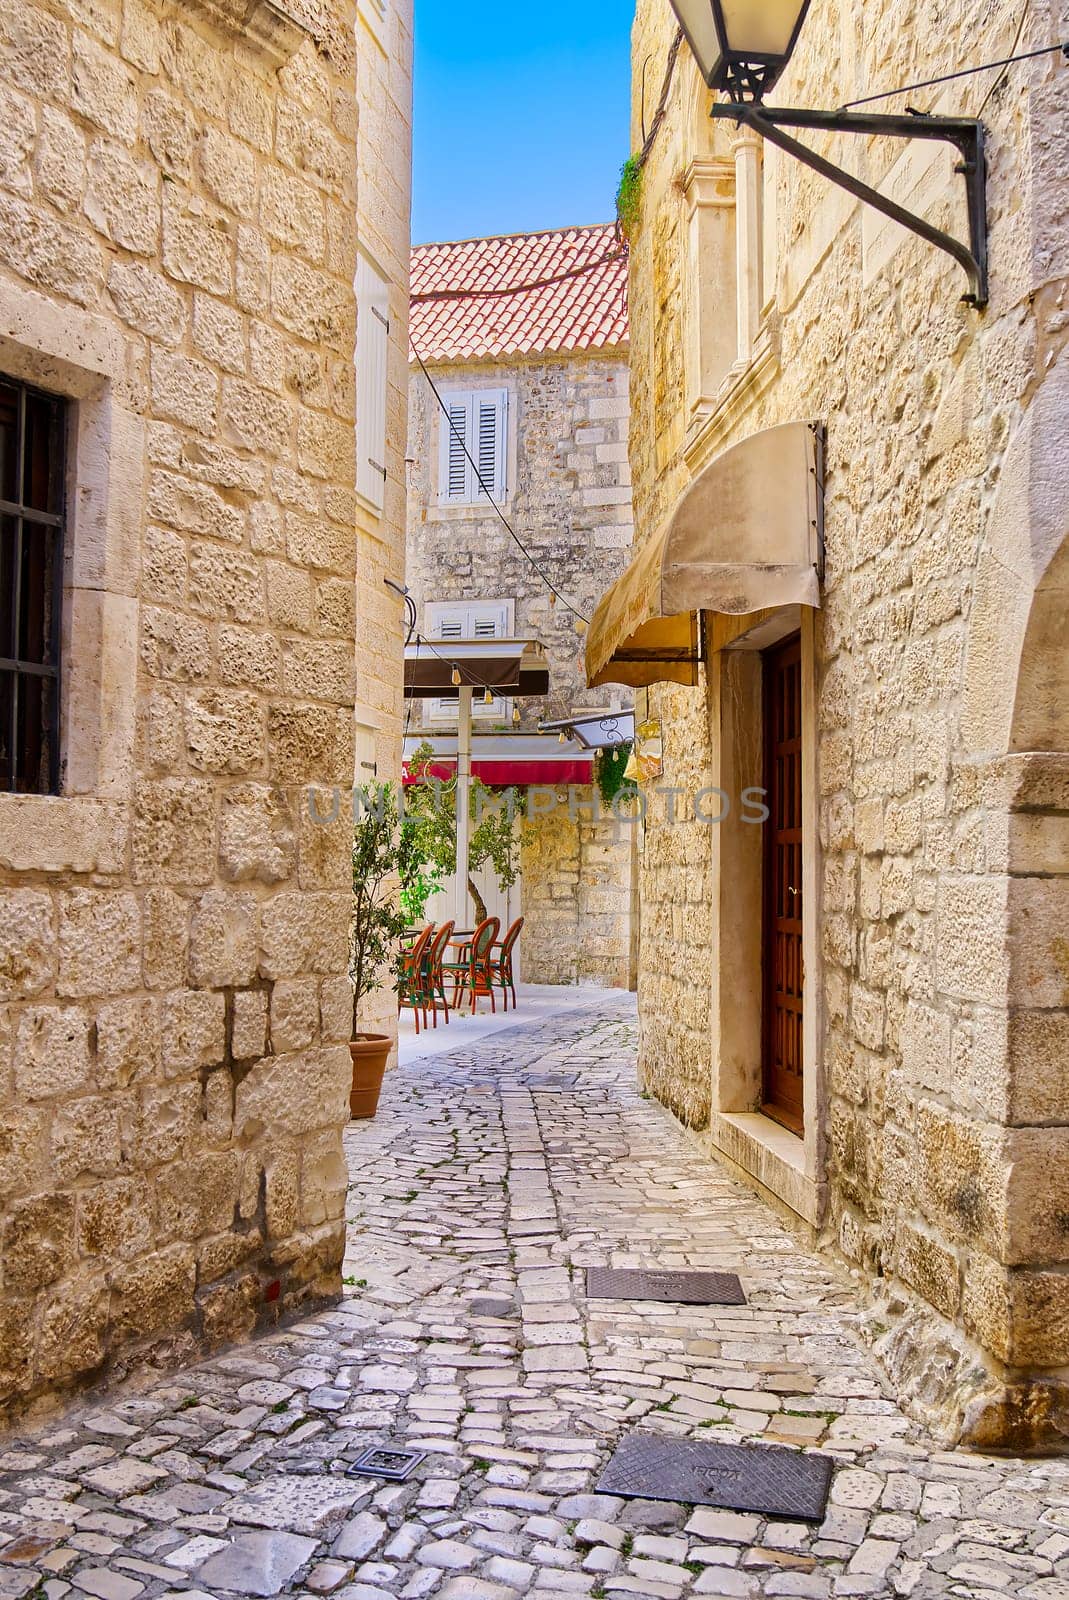 Narrow street with stone houses. Old houses and old narrow alley in Trogir, Croatia, Europe by PhotoTime